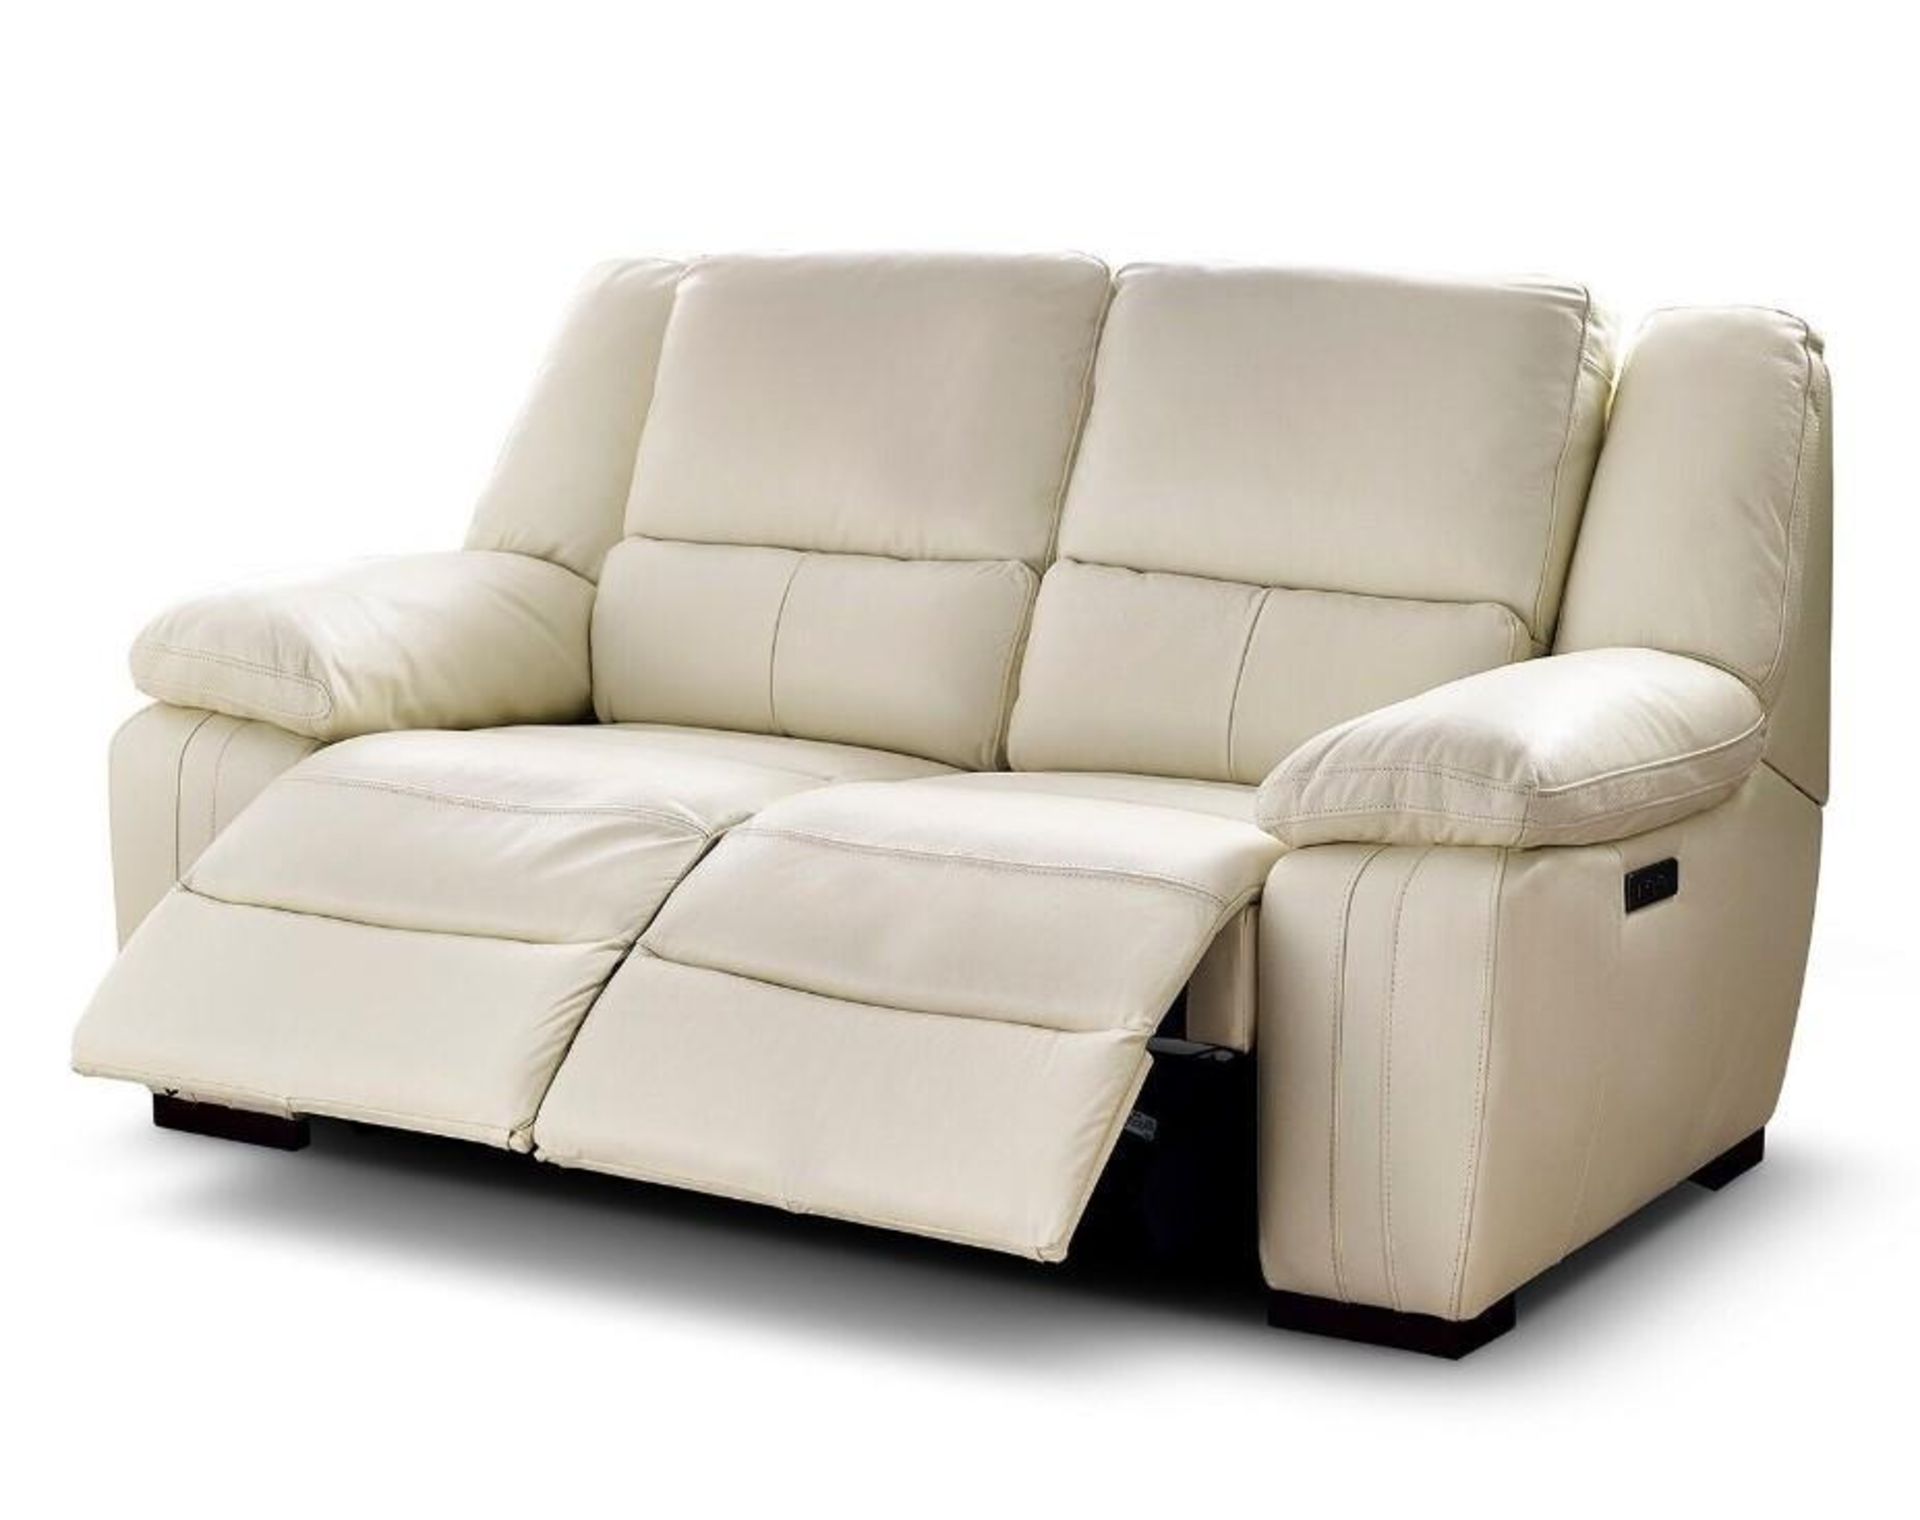 Brand new and boxed SCS Fallon 3 seater electric reclining sofa in Cream. - Bild 3 aus 7